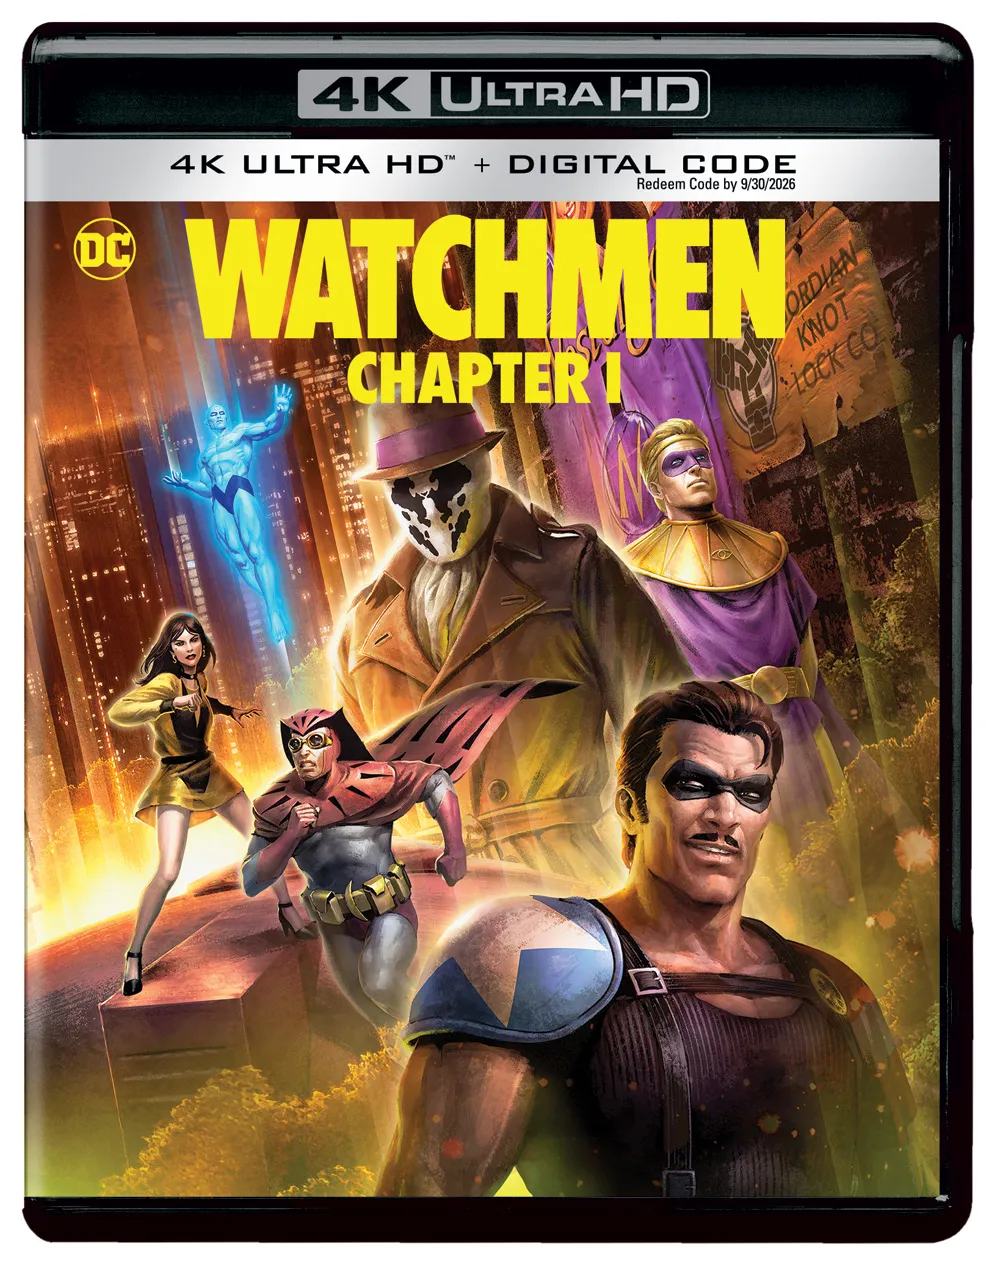 'Watchmen Chapter 1' 4K Blu-ray Release Date Set for August 27